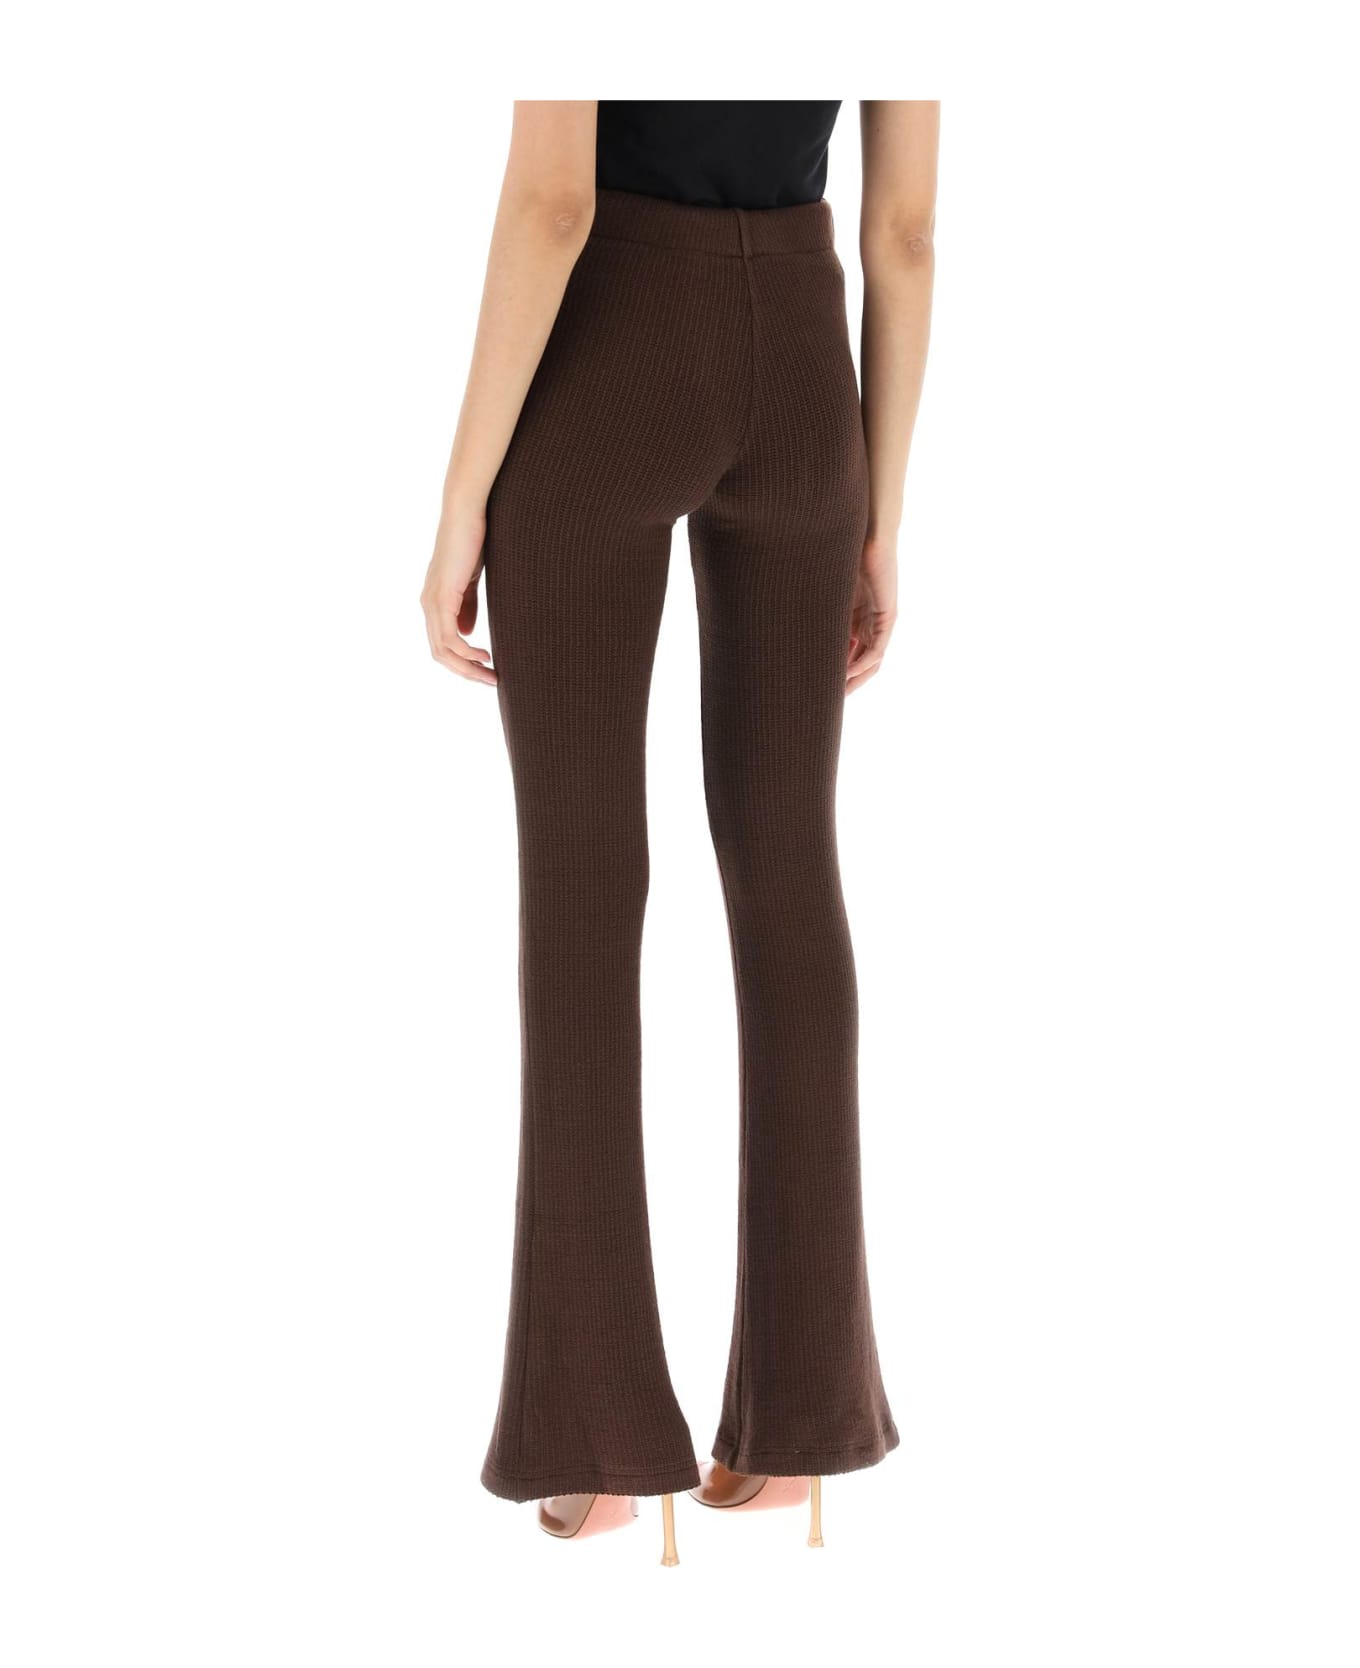 SIEDRES 'flo' Knitted Pants - Brown